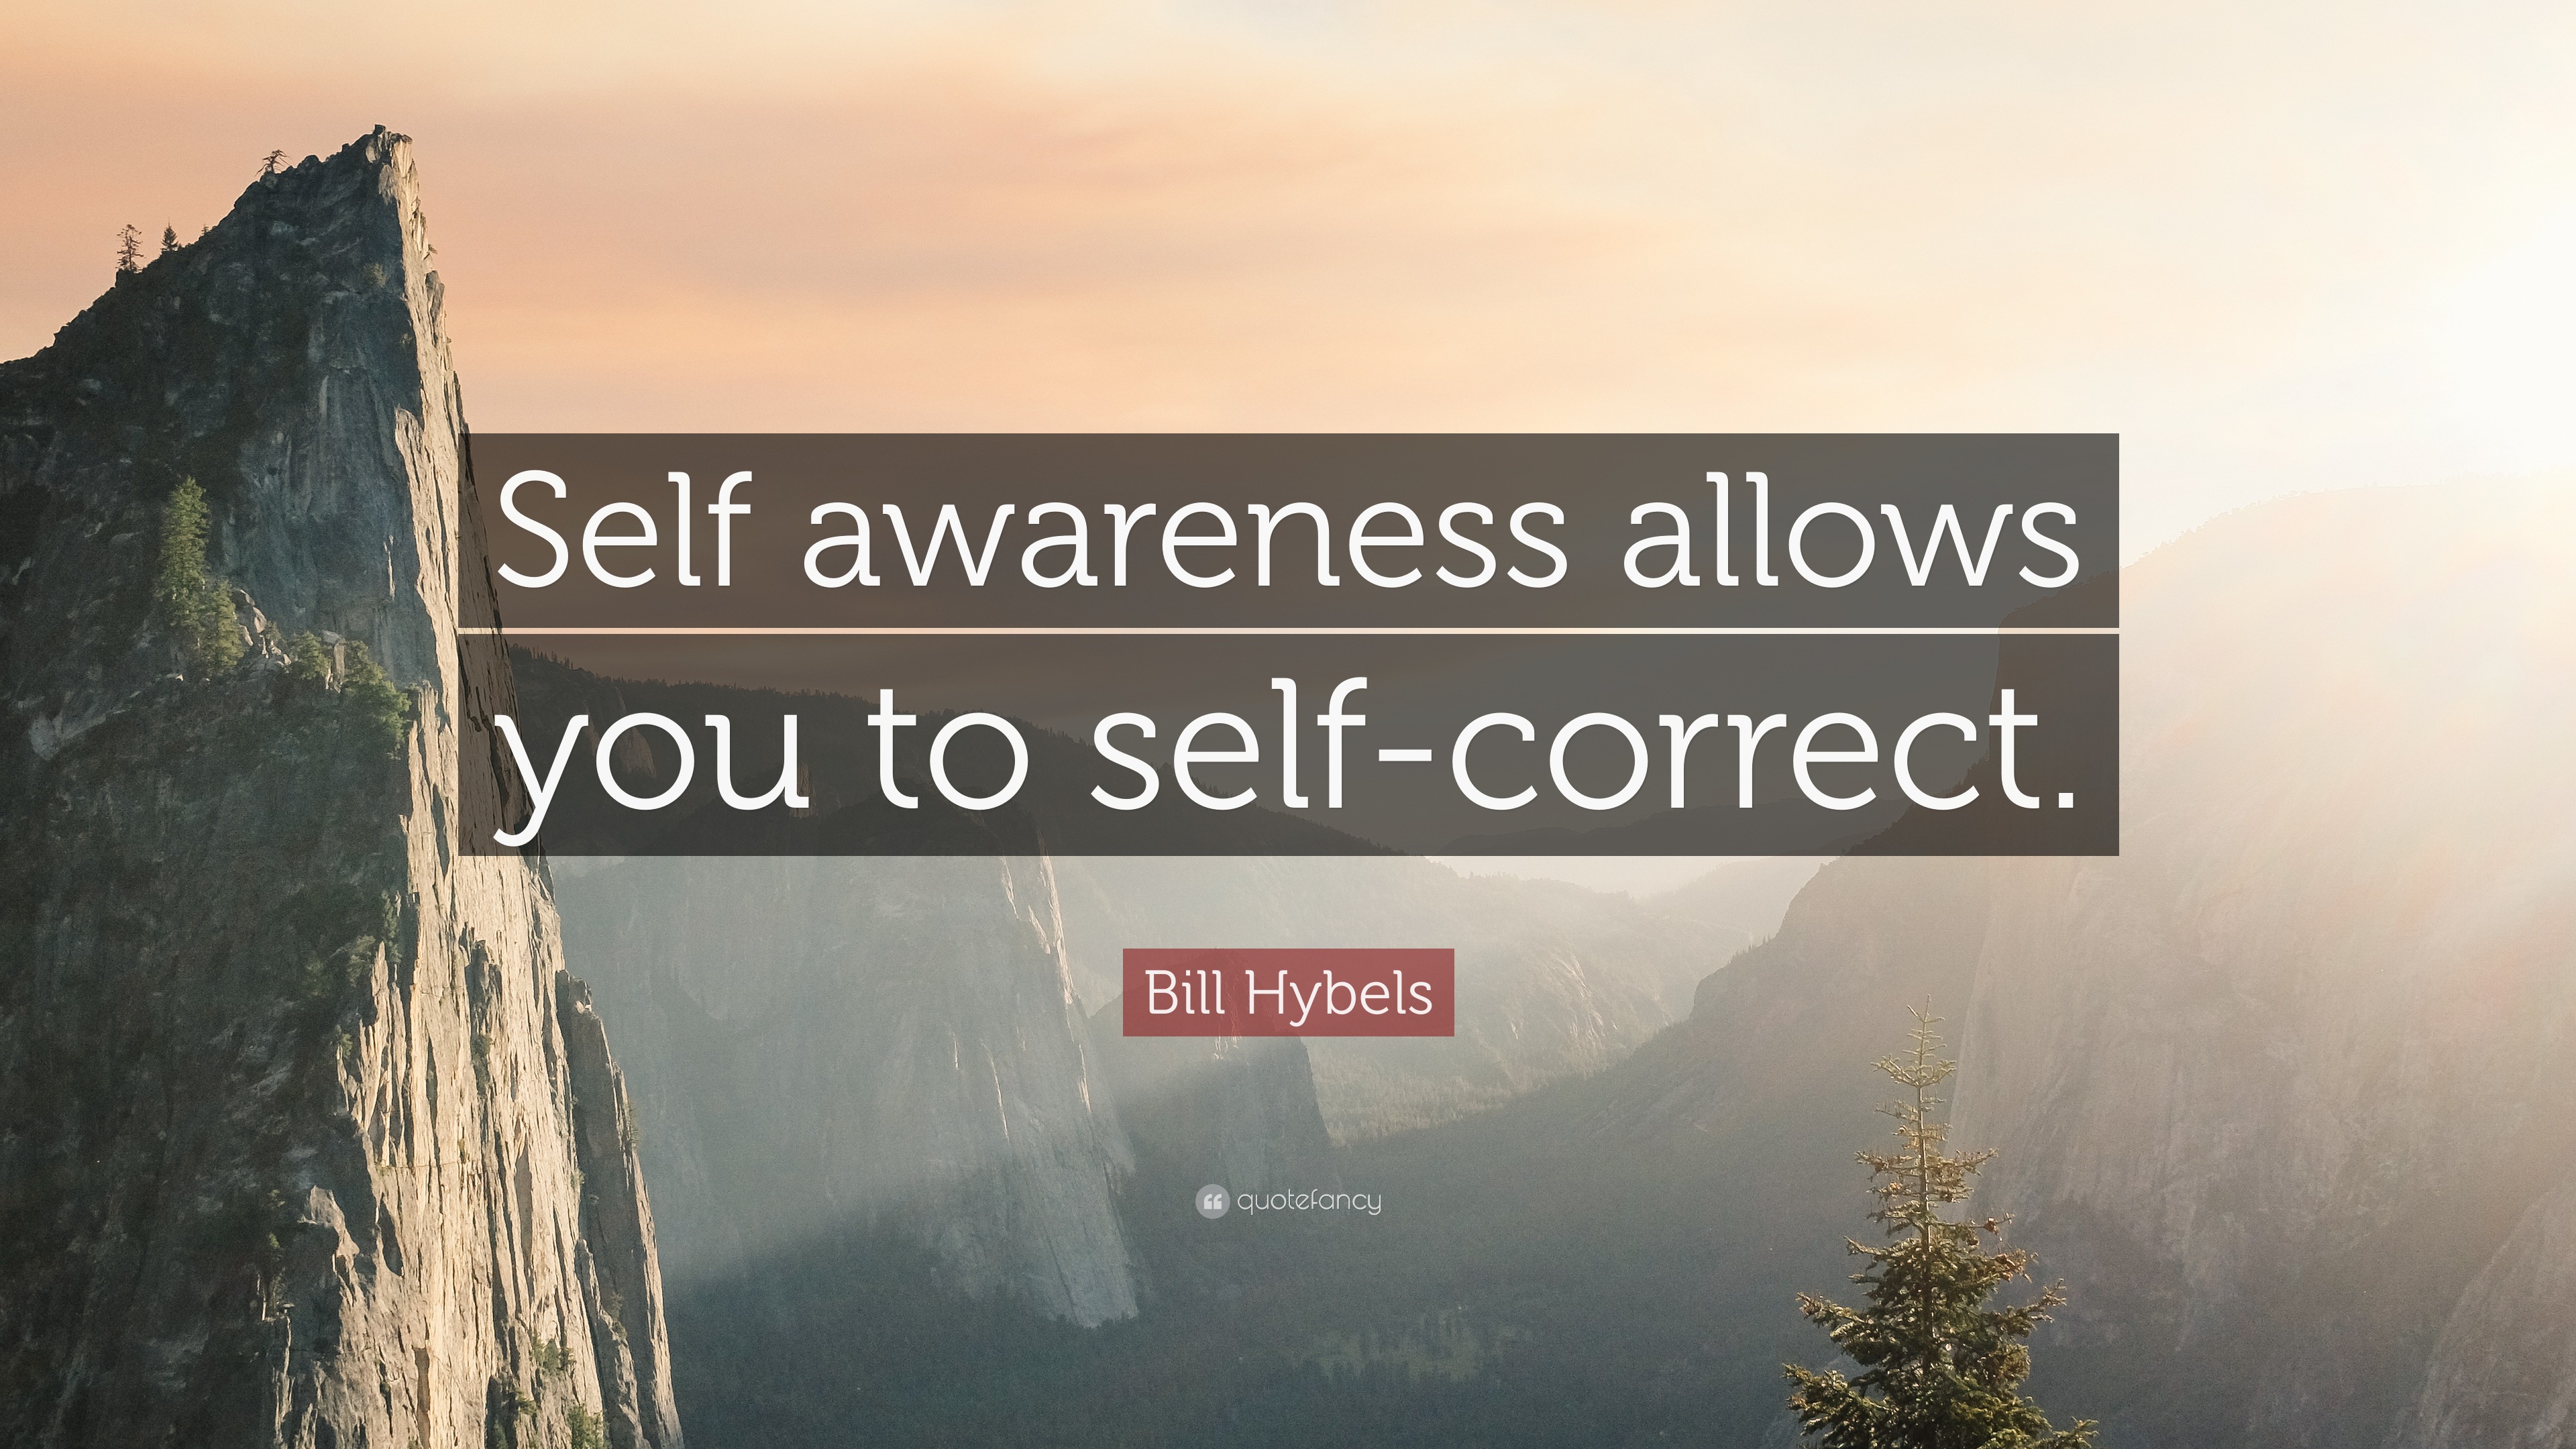 Bill Hybels Quote: "Self awareness allows you to self-correct." (9 wallpapers) - Quotefancy